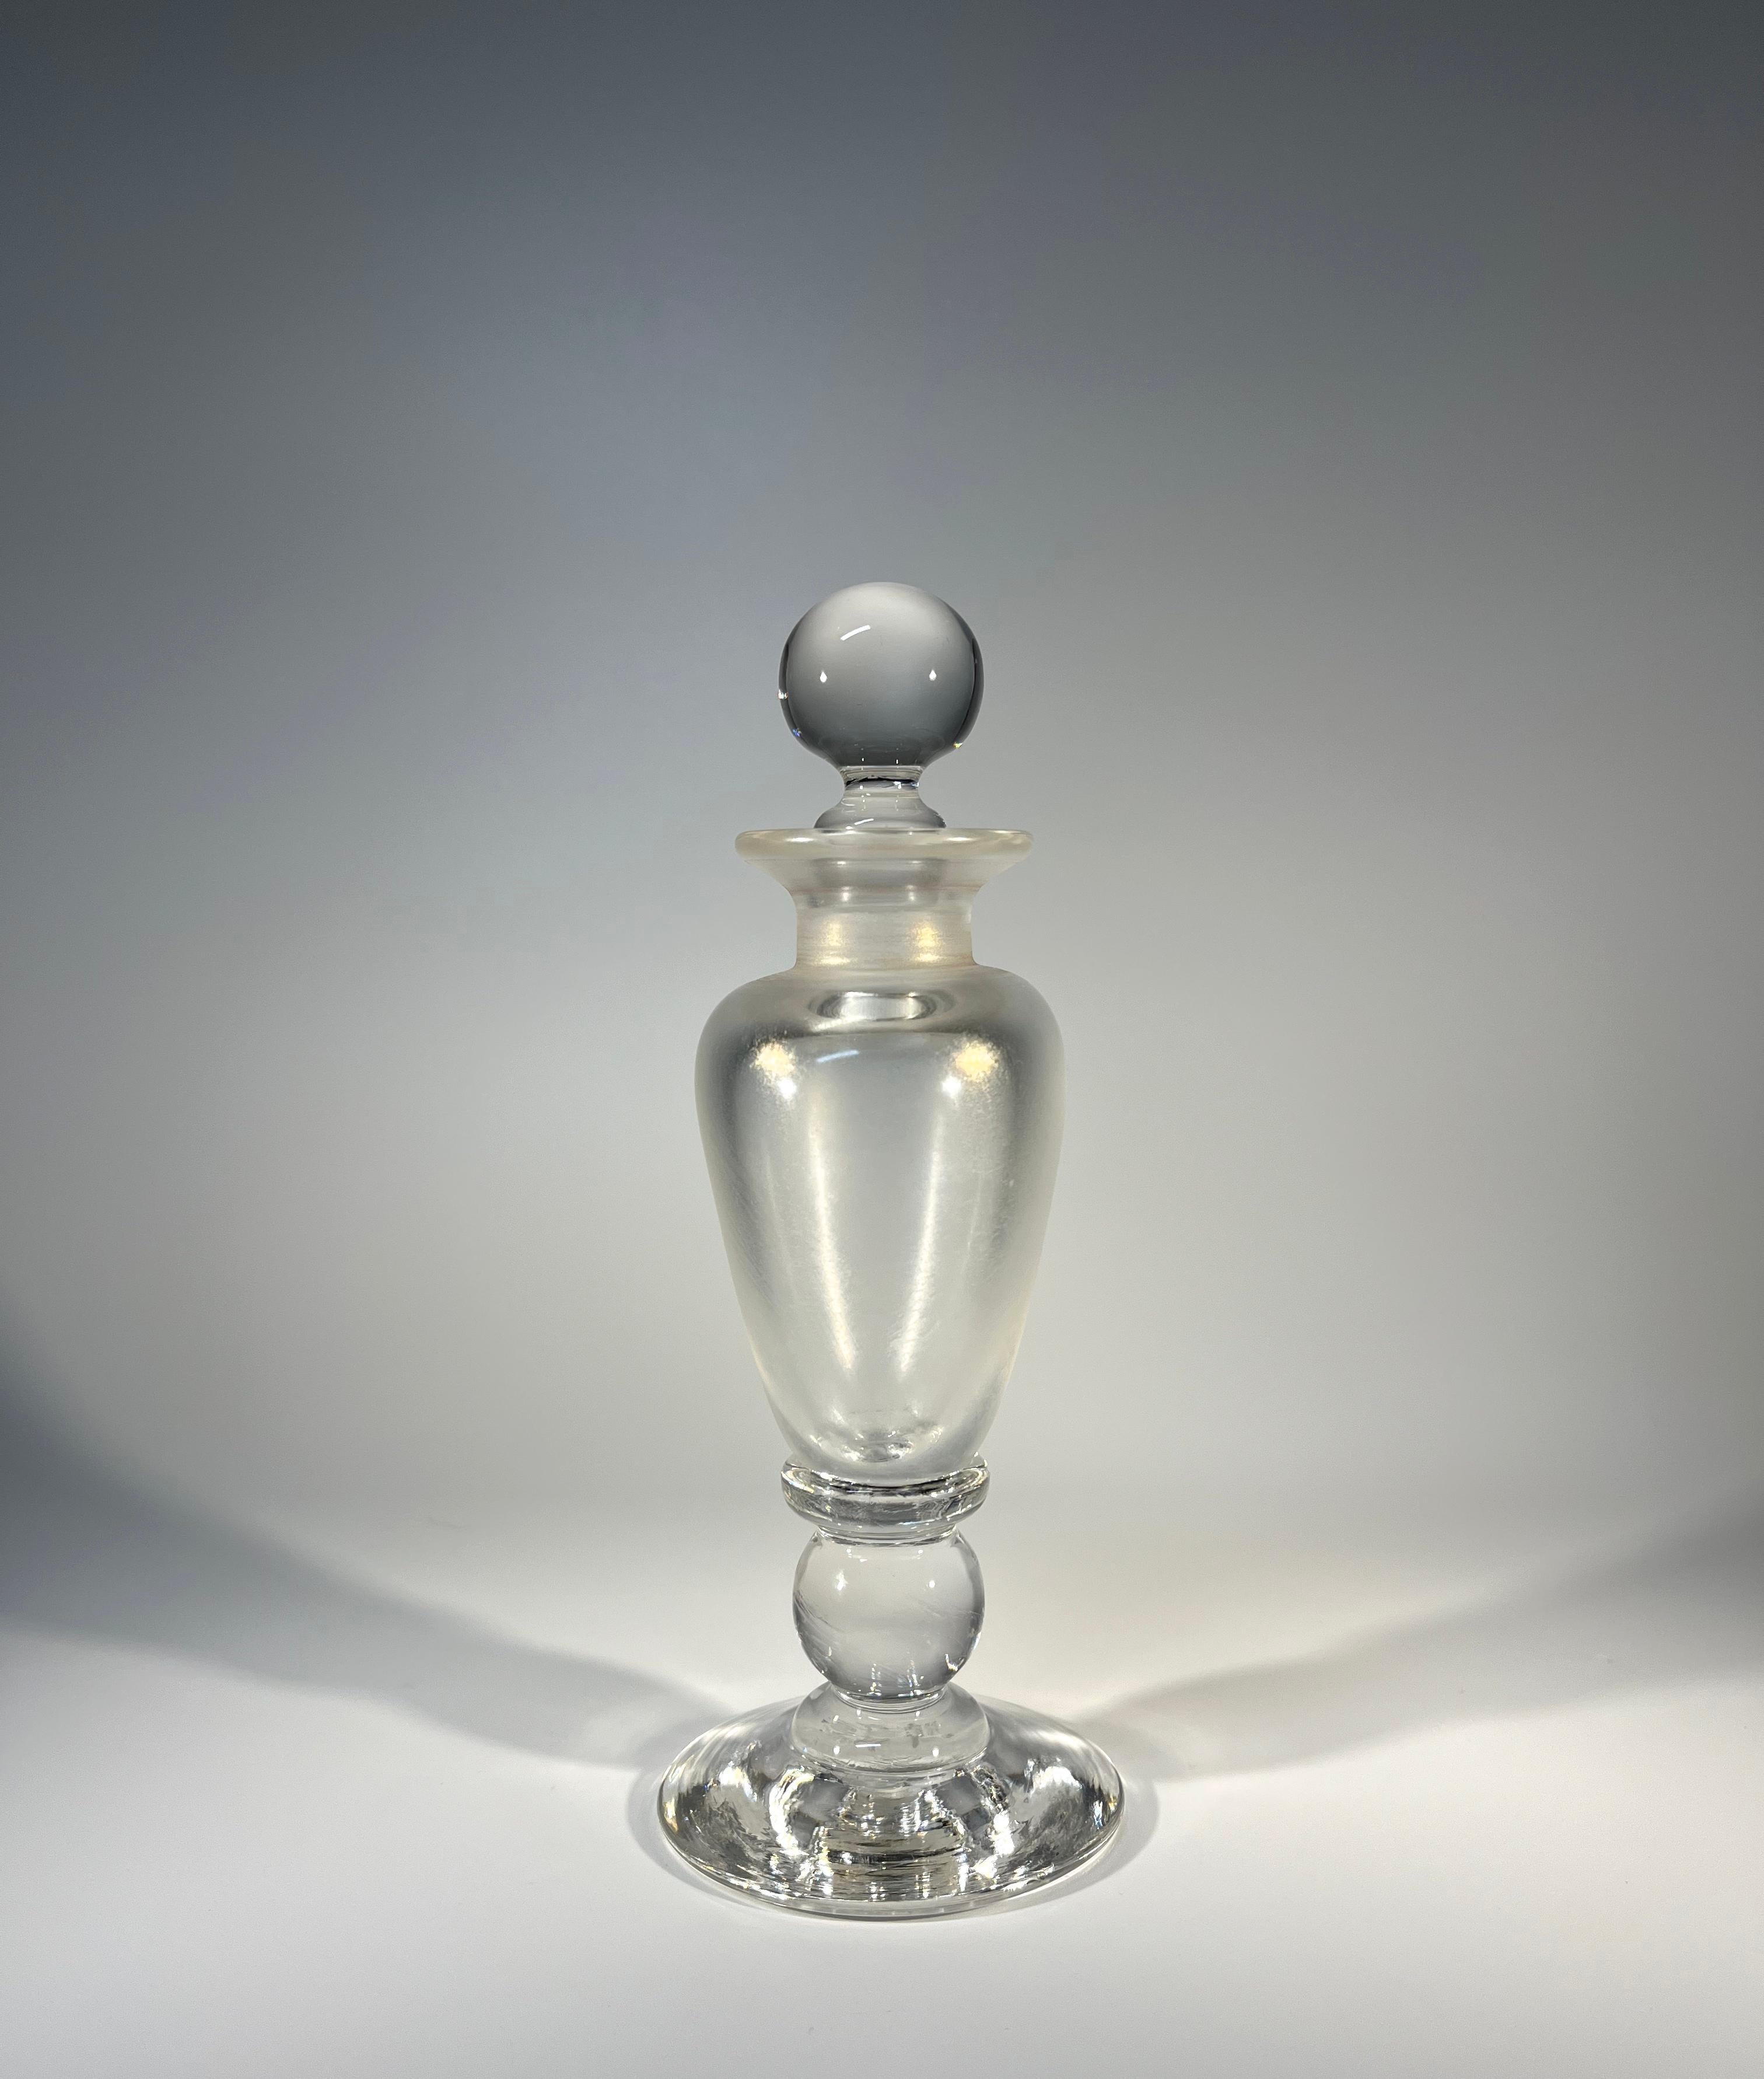 David Wallace, Pearlescent Hand Crafted English Glass Perfume Bottle c1980s In Excellent Condition For Sale In Rothley, Leicestershire